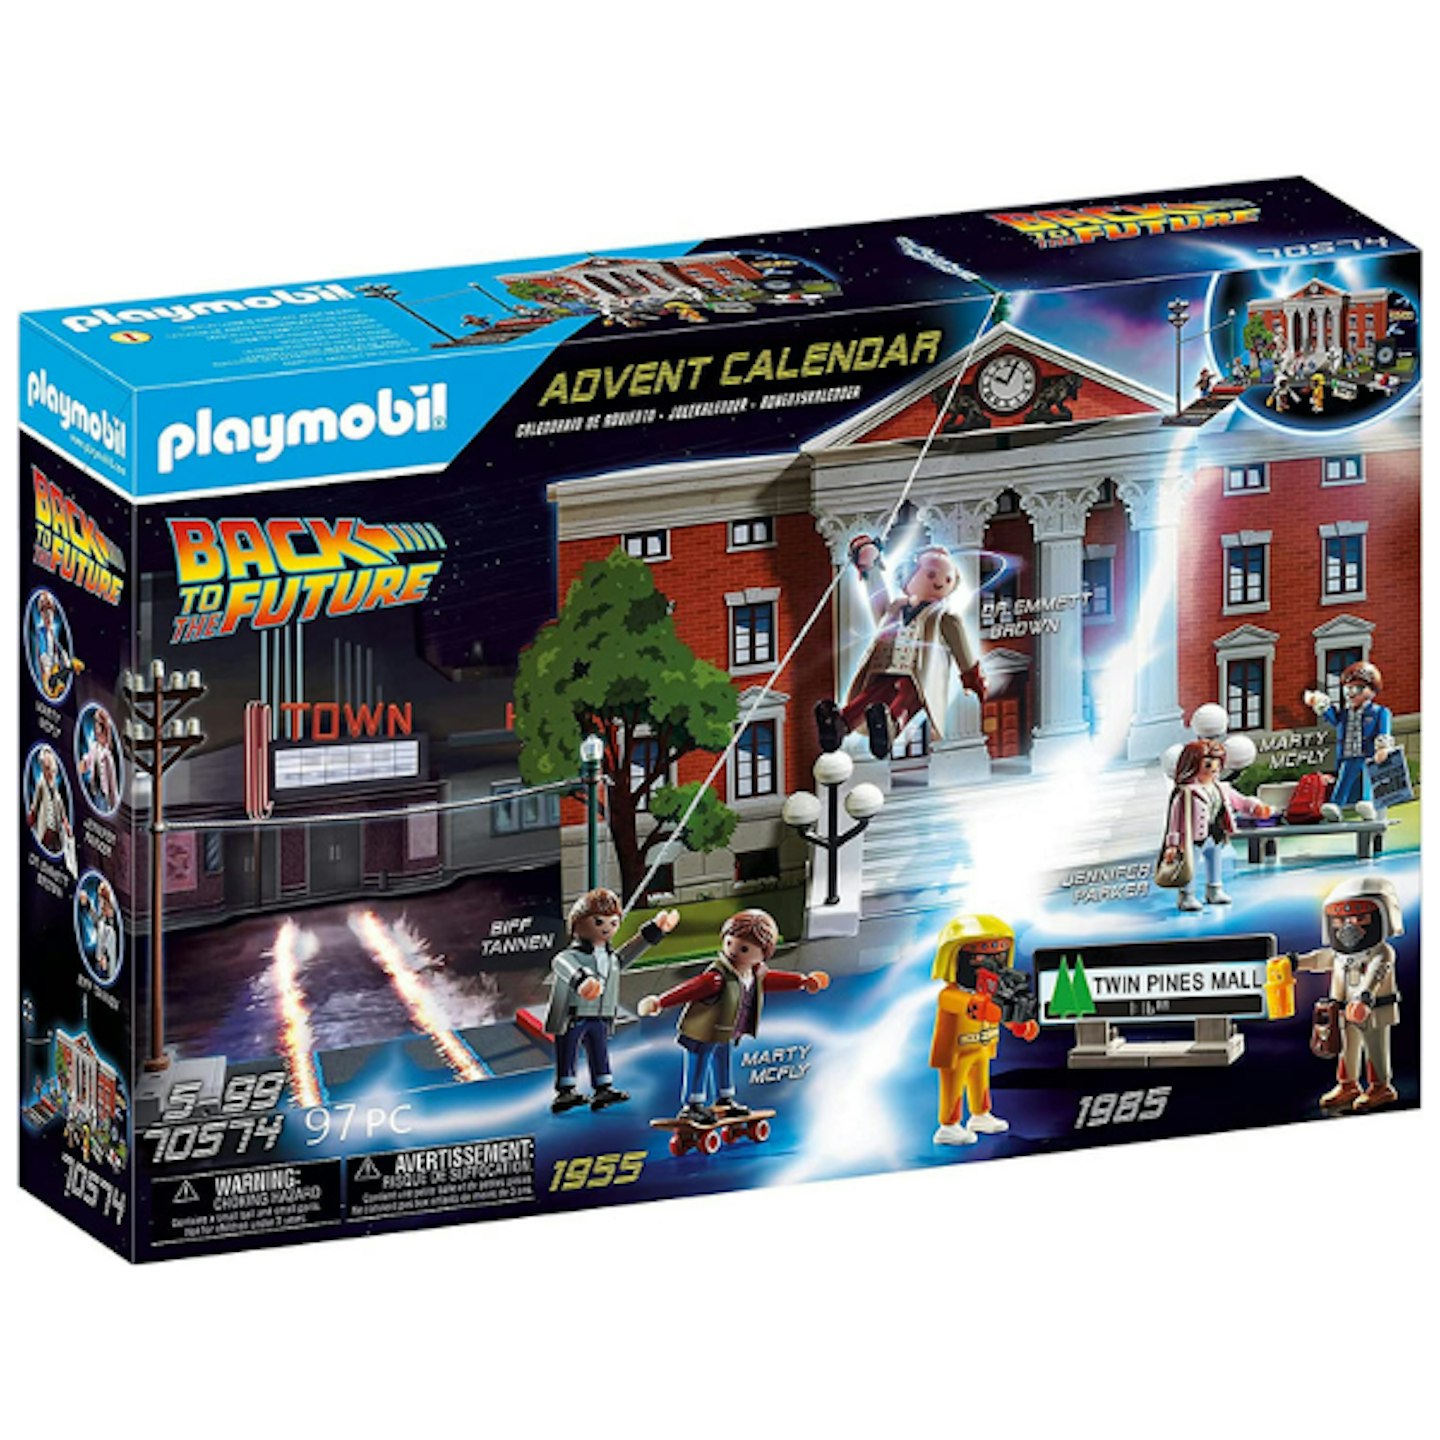 PLAYMOBIL 70574 Advent Calendar - Back to the Future with Characters and Accessories from the First Film